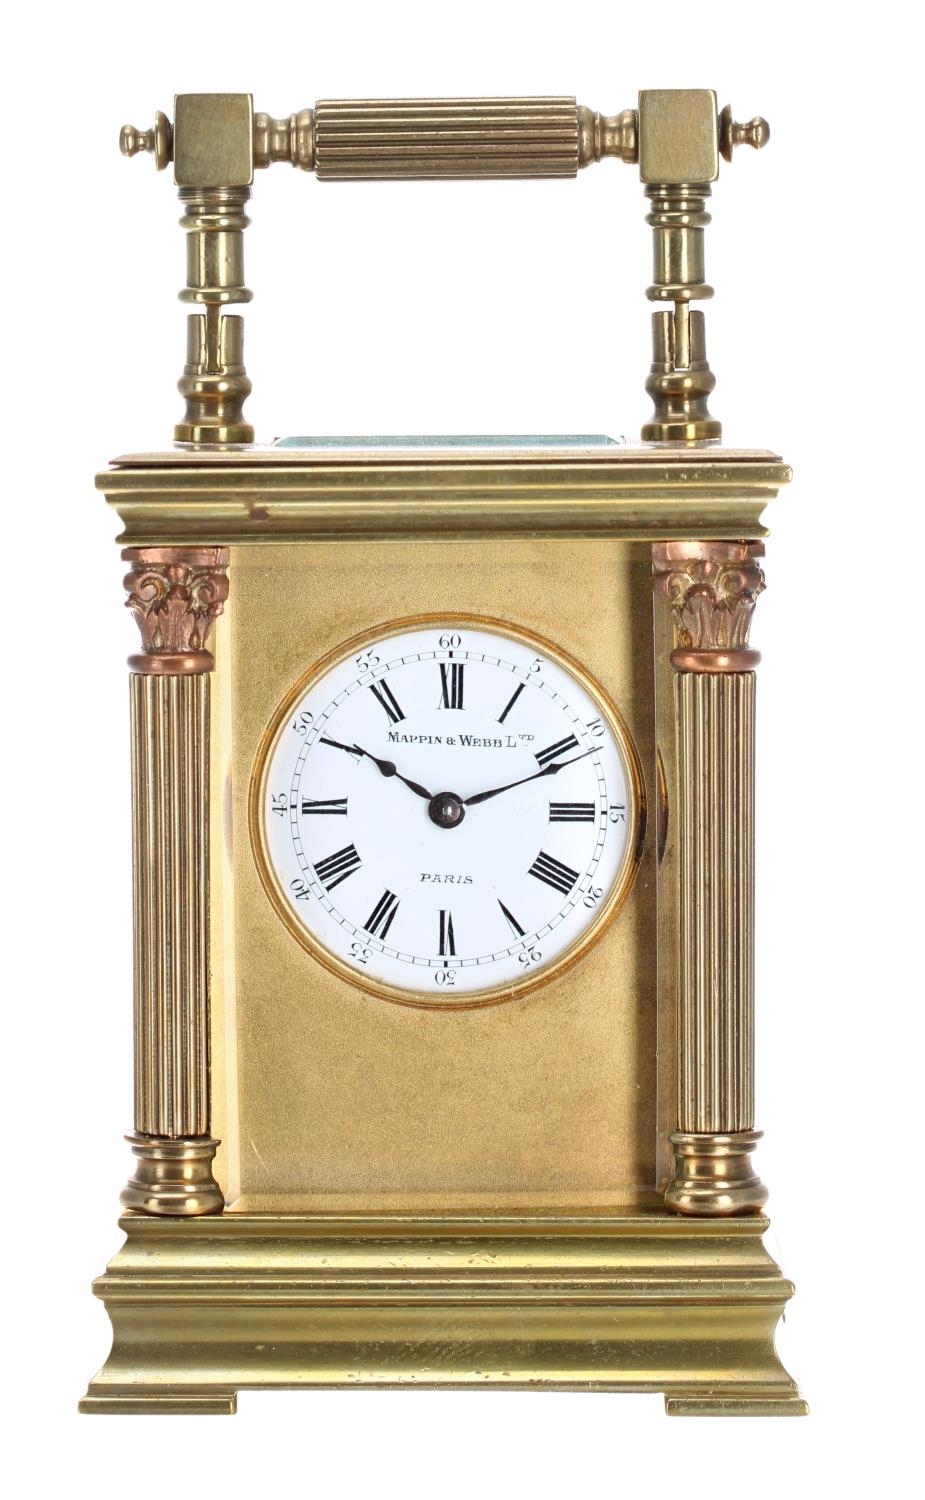 Mappin & Webb small carriage clock timepiece, the 1.5" white enamel dial signed Mappin & Webb Ltd,